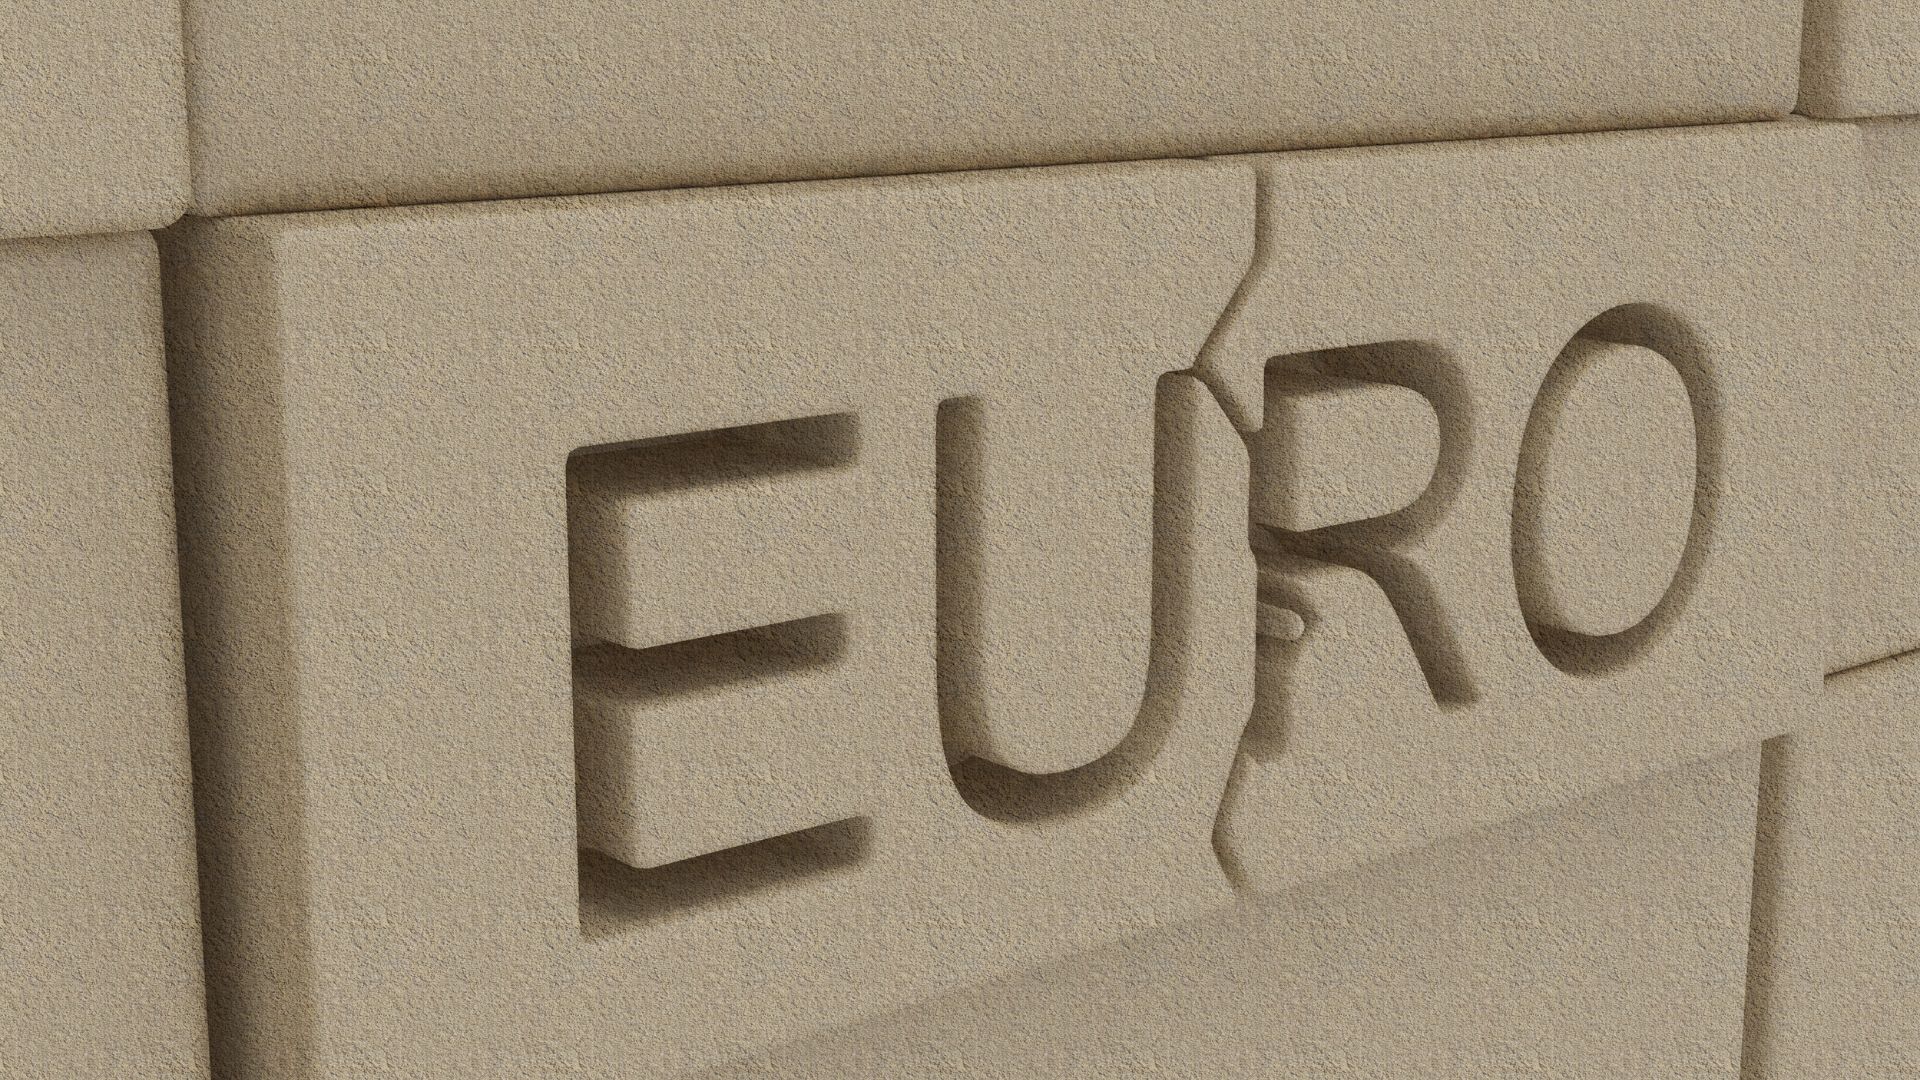 Euro remains vulnerable